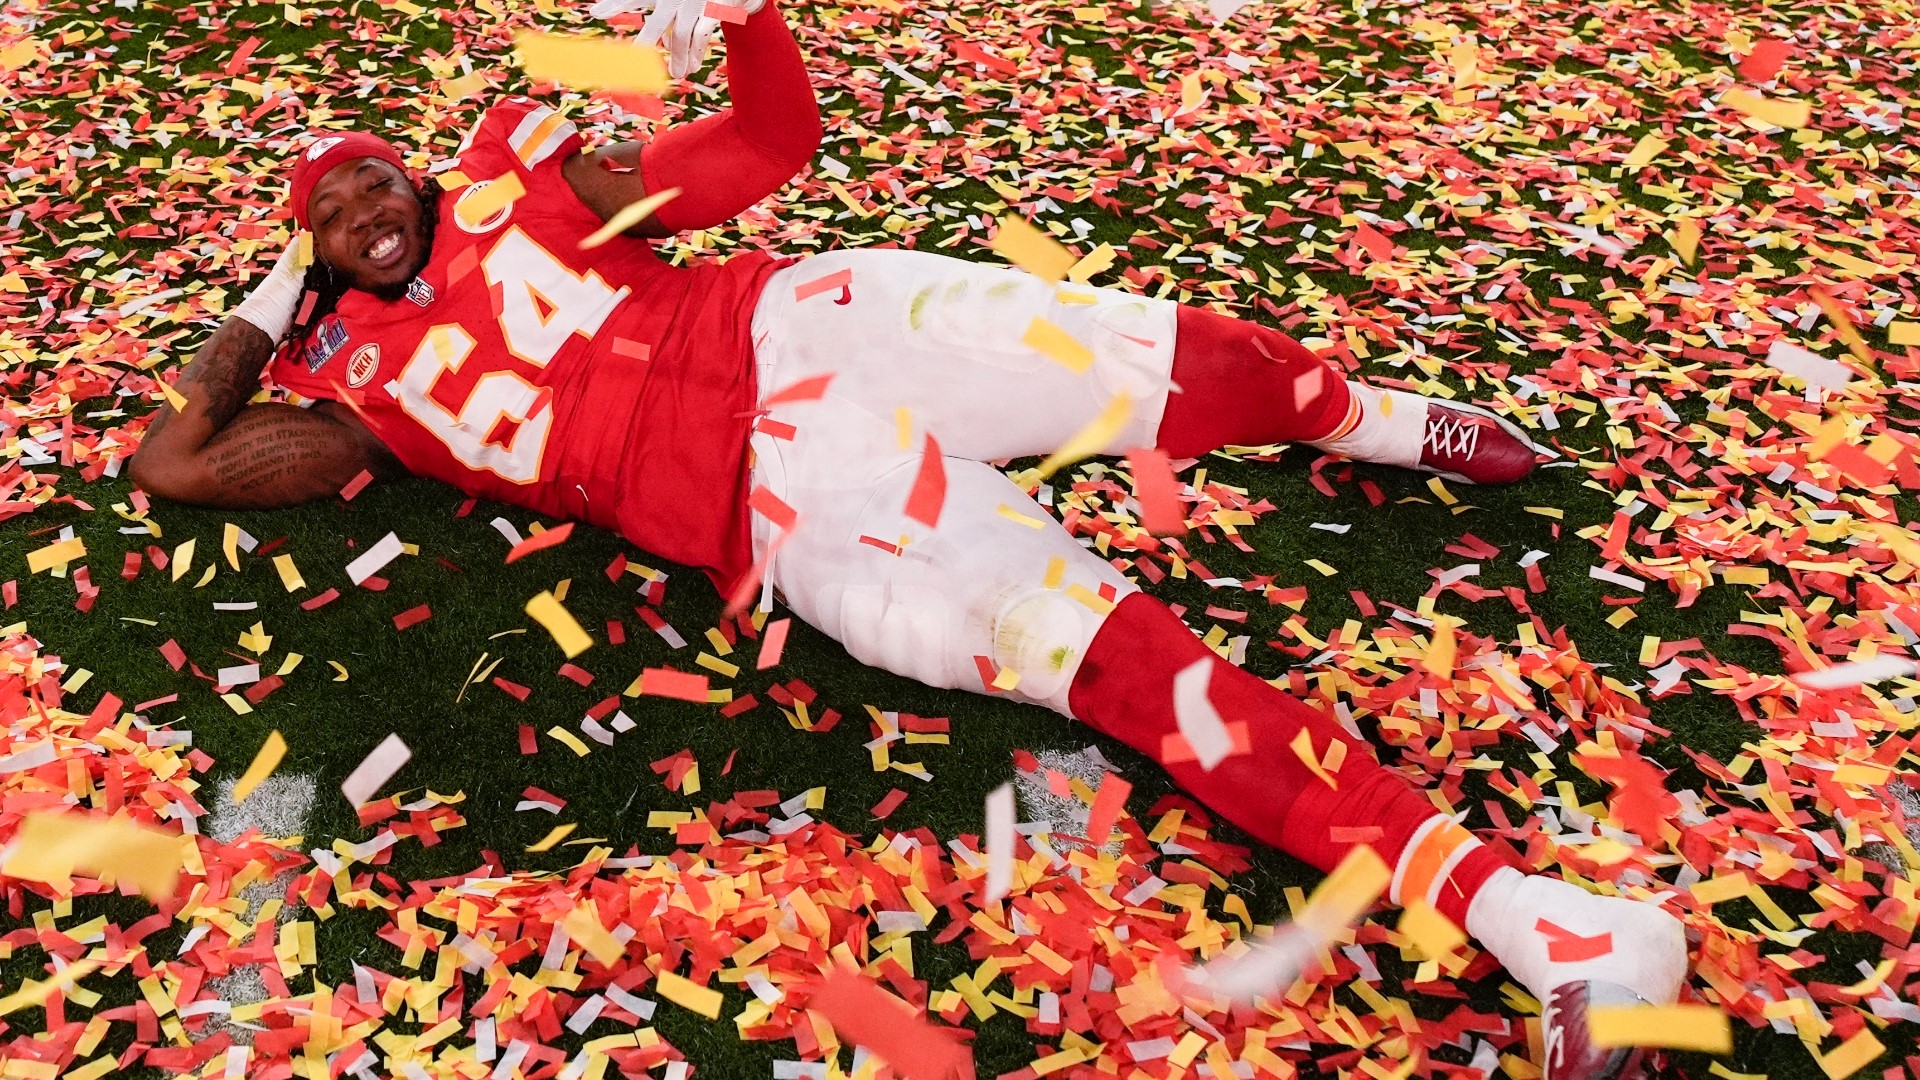 The Chiefs took home their second-straight Super Bowl win Sunday night against the 49ers. The team will parade through the streets of Kansas City on Wednesday.